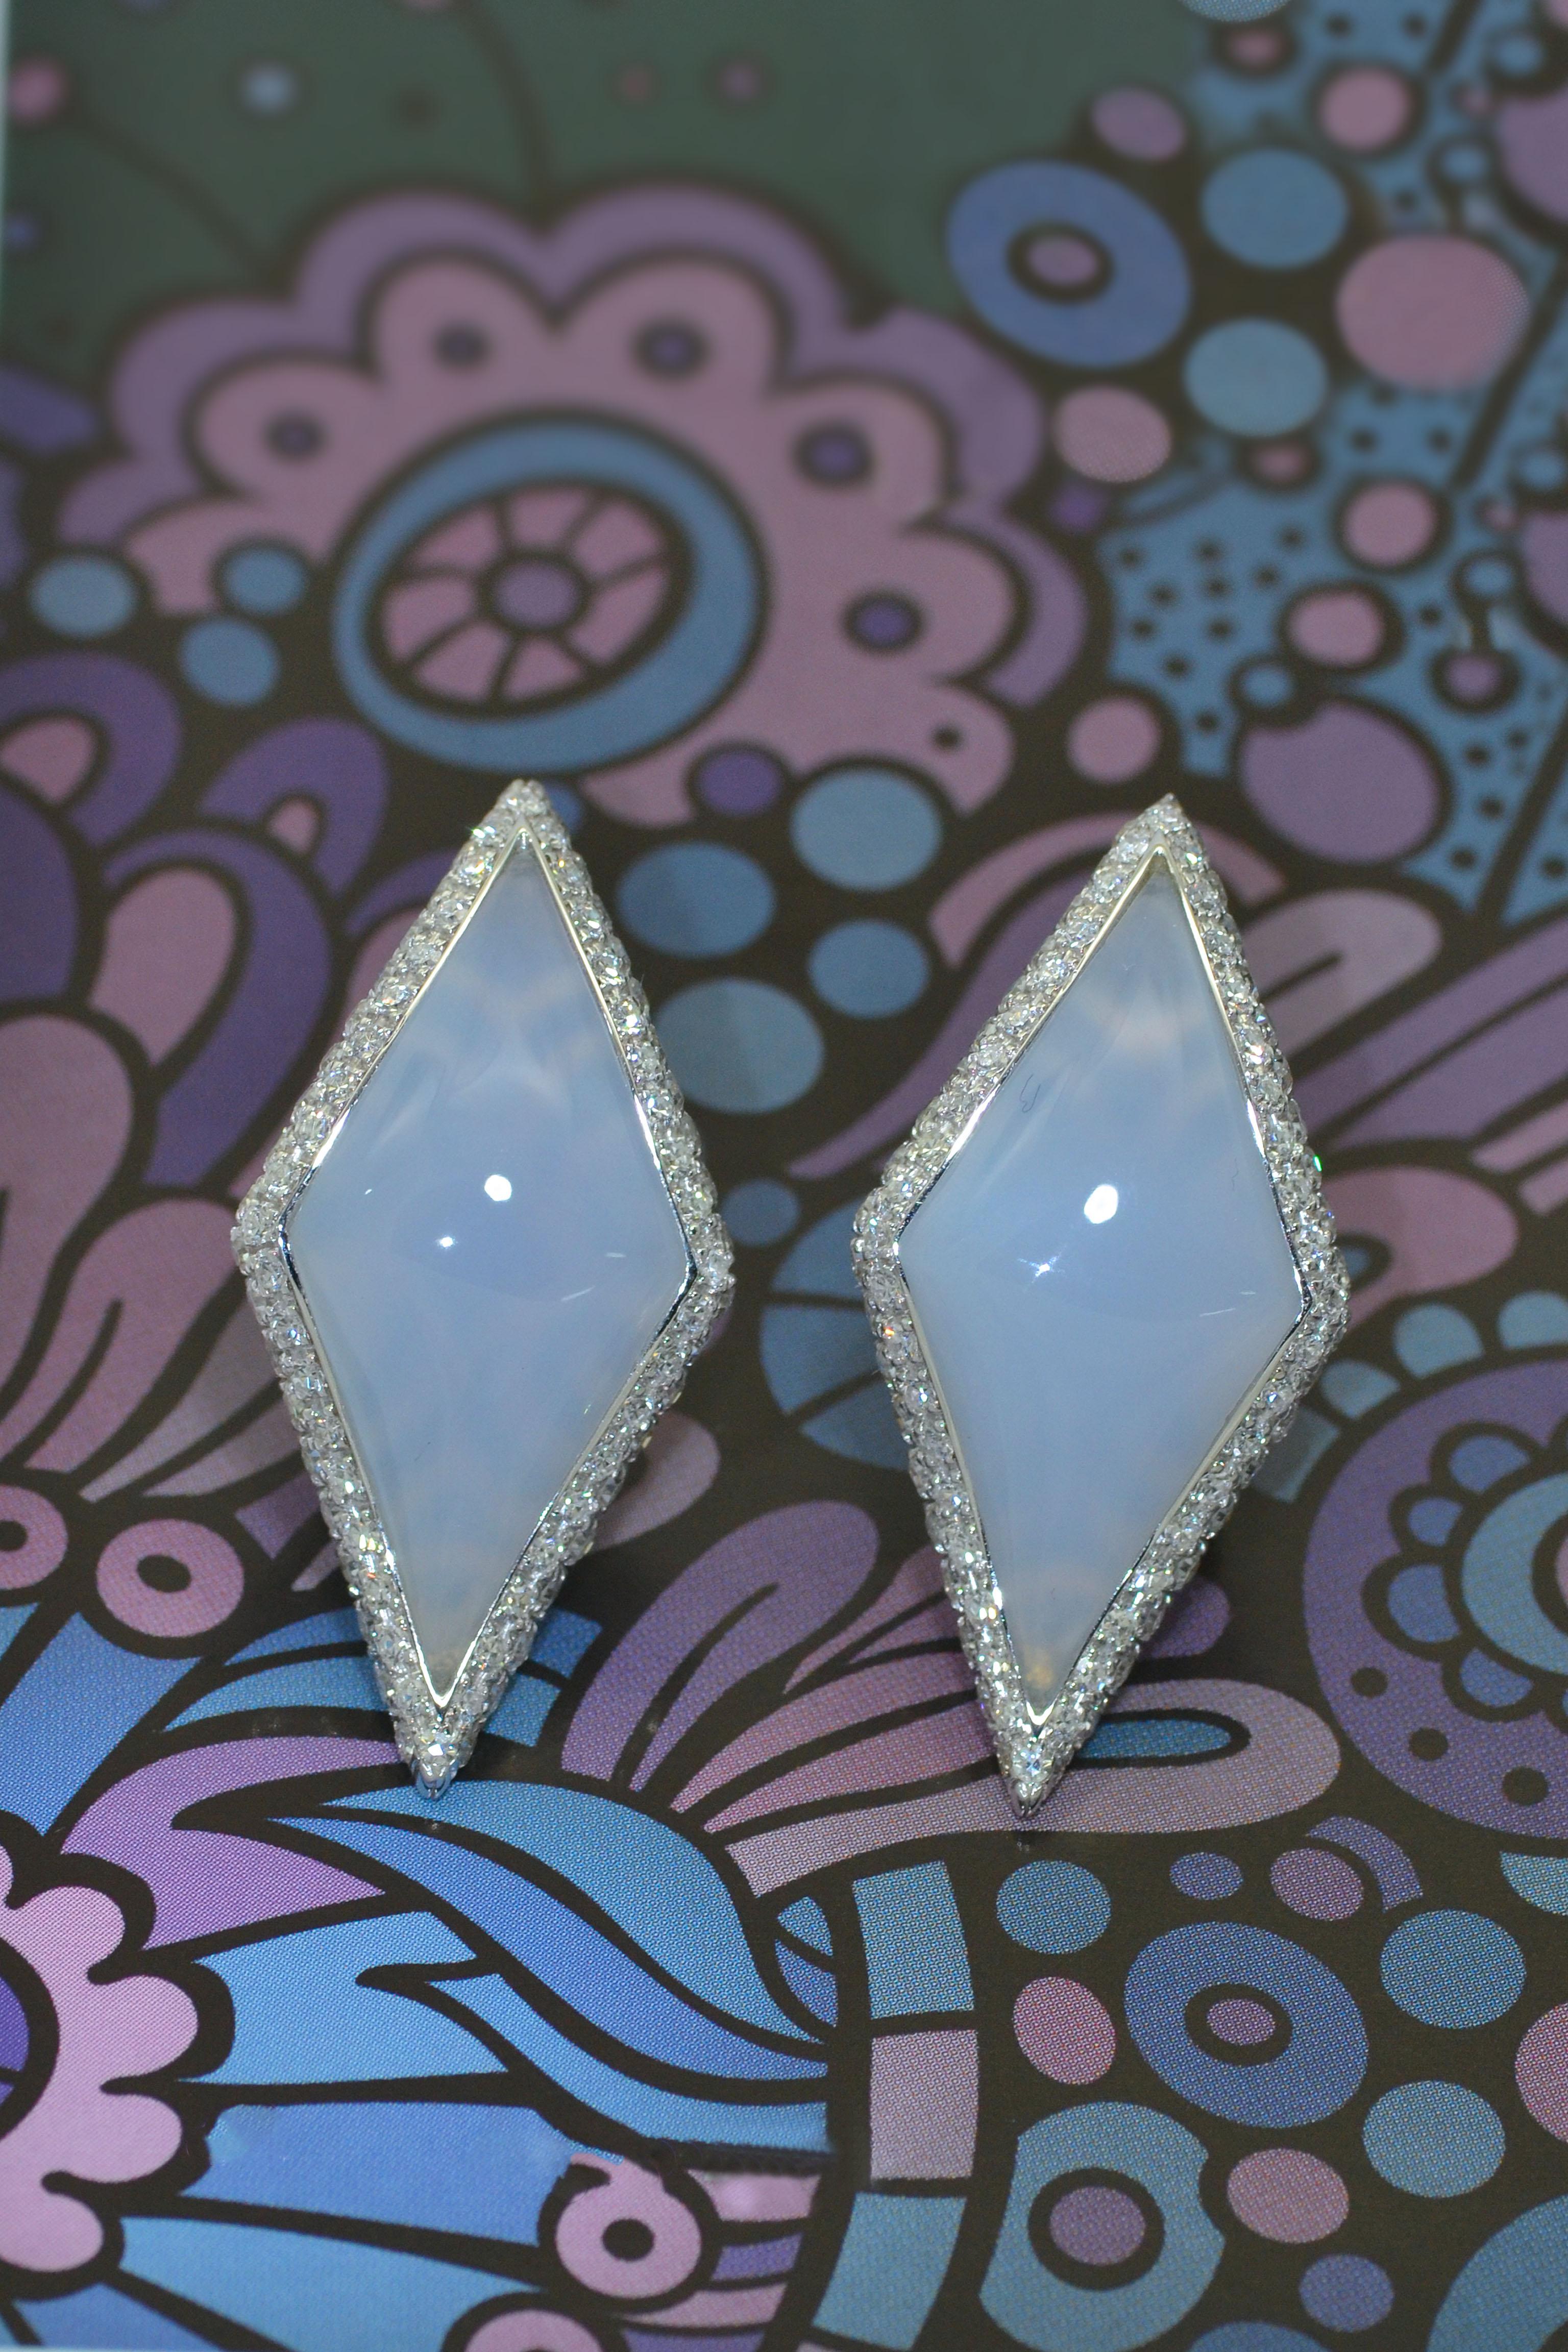 Handcrafted in Margherita family  workshop,  Italy, these earrings are chic and unique.
Rhombus shape natural blue chalcedony surrounded by a pavé set diamonds, you can wear them as climber earrings. 
Light and comfortable they feature fitting posts